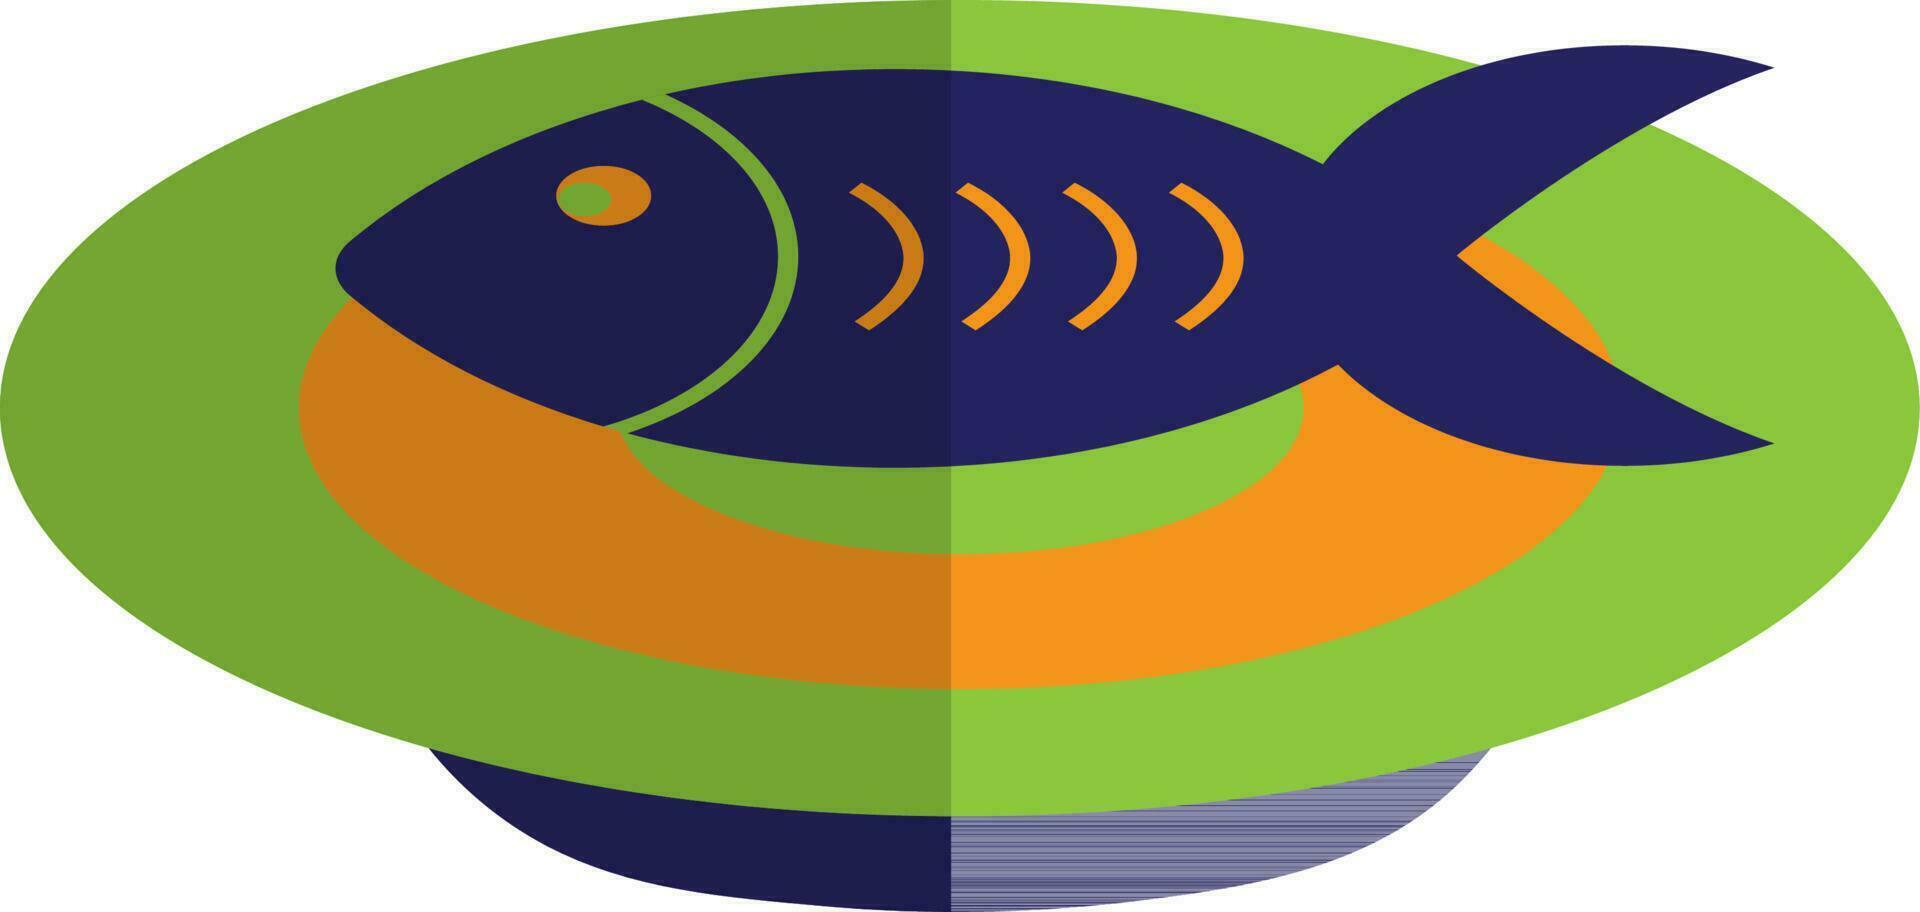 Character of blue fish on green and orange plate. vector